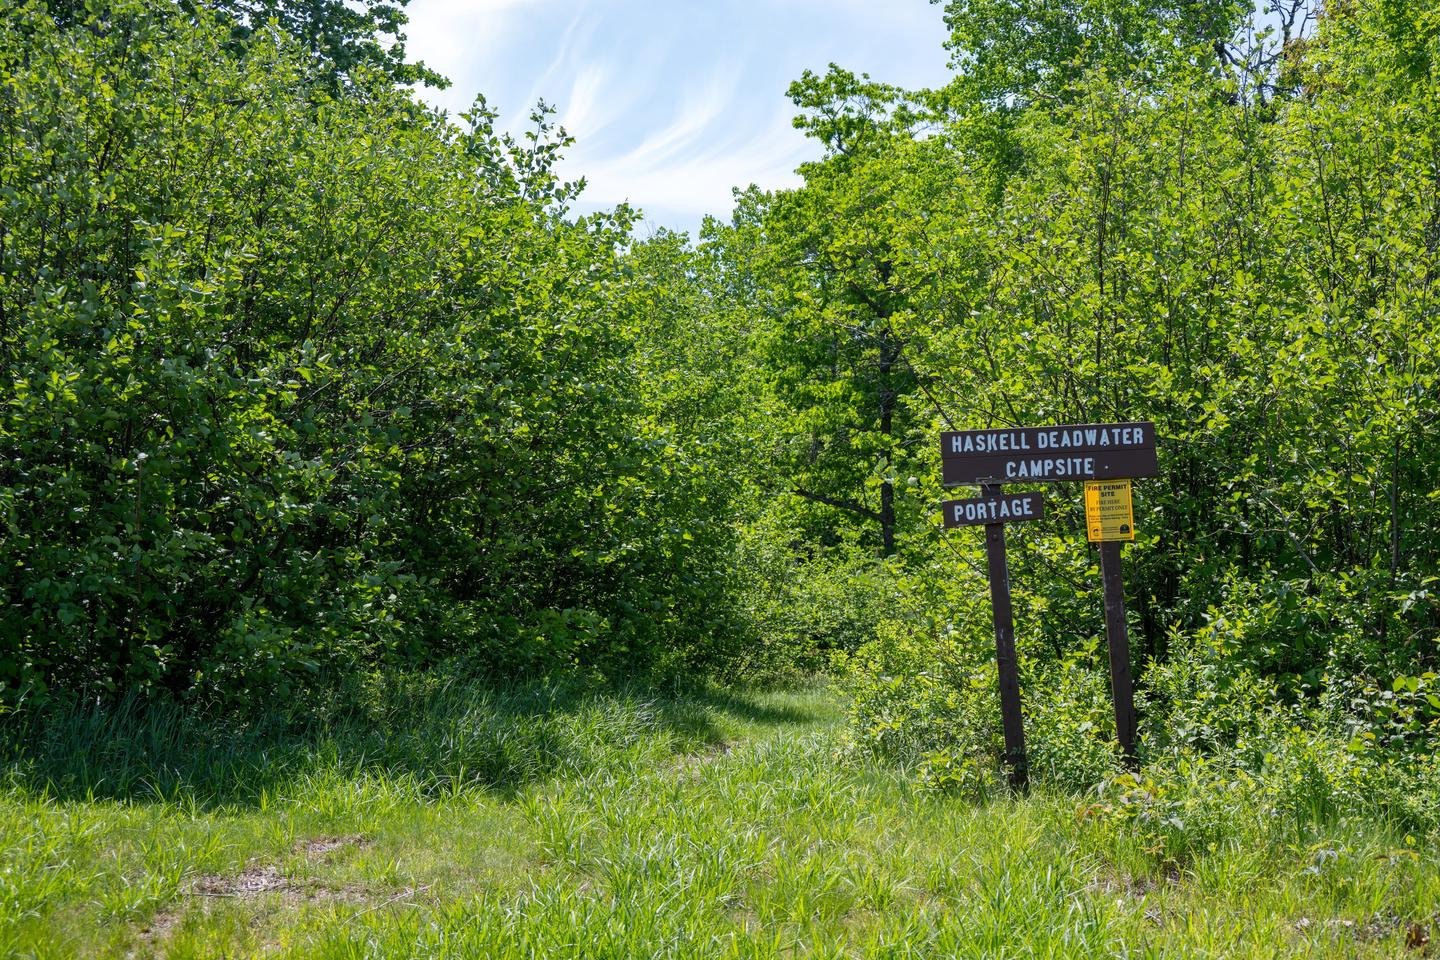 A grassy portage trail with tall shrubs and trees with a brown wooden sign. The sign points out Haskell Deadwater Campsite from Haskell Deadwater for paddlers. A wooden sign points out Haskell Campsite and portage trail for paddlers.